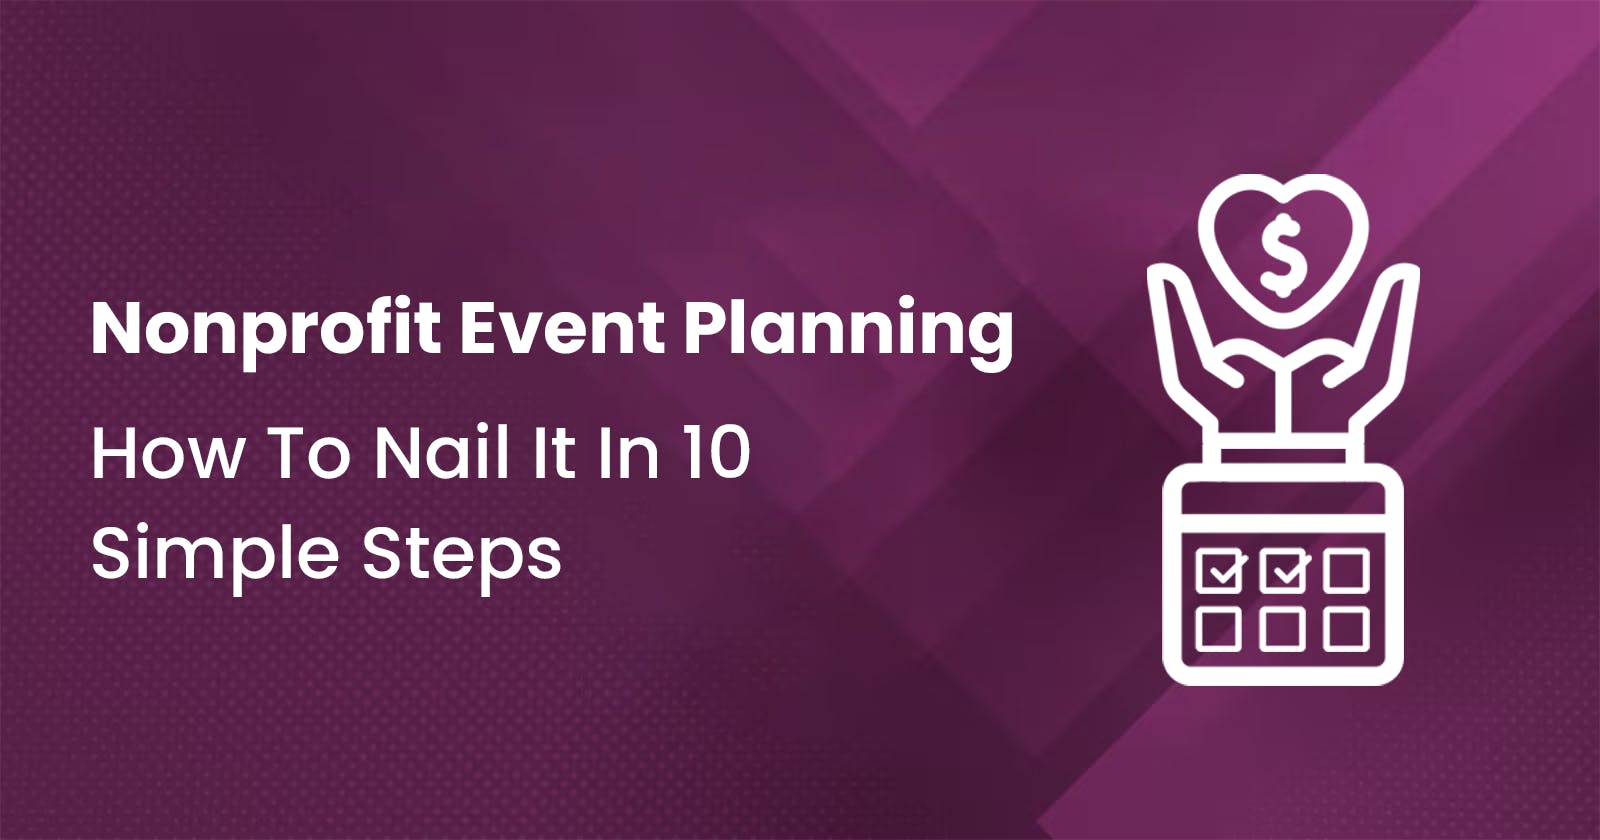 Nonprofit Event Planning: How To Nail It In 10 Simple Steps